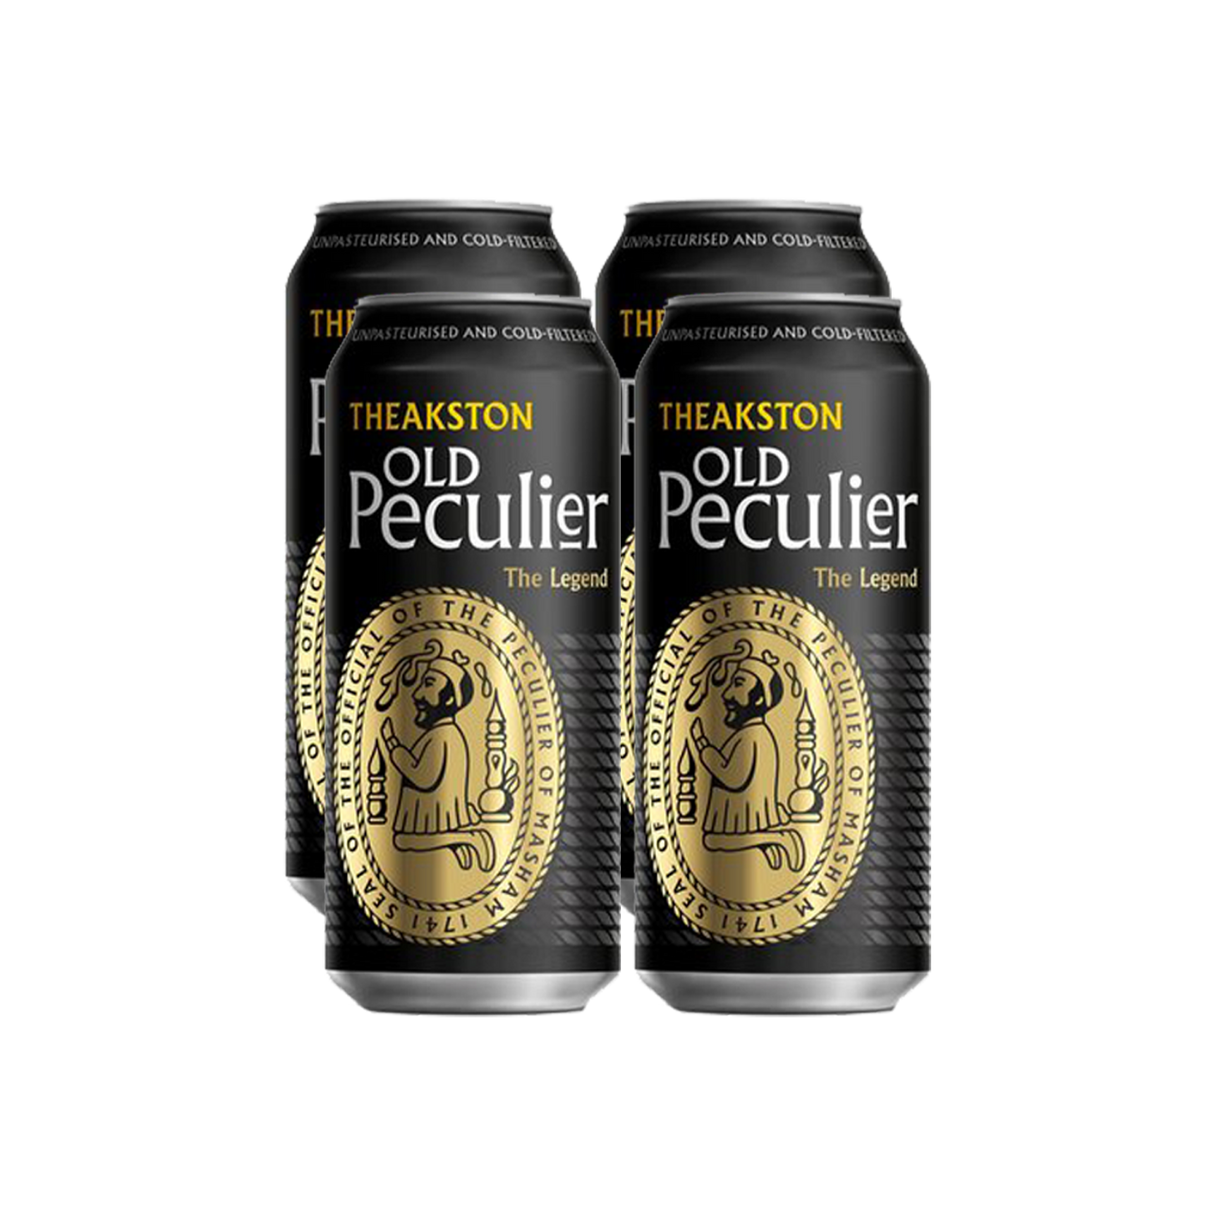 Theakston Old Peculier 5.6% 440ml CAN (4 Pack) x 1 unit